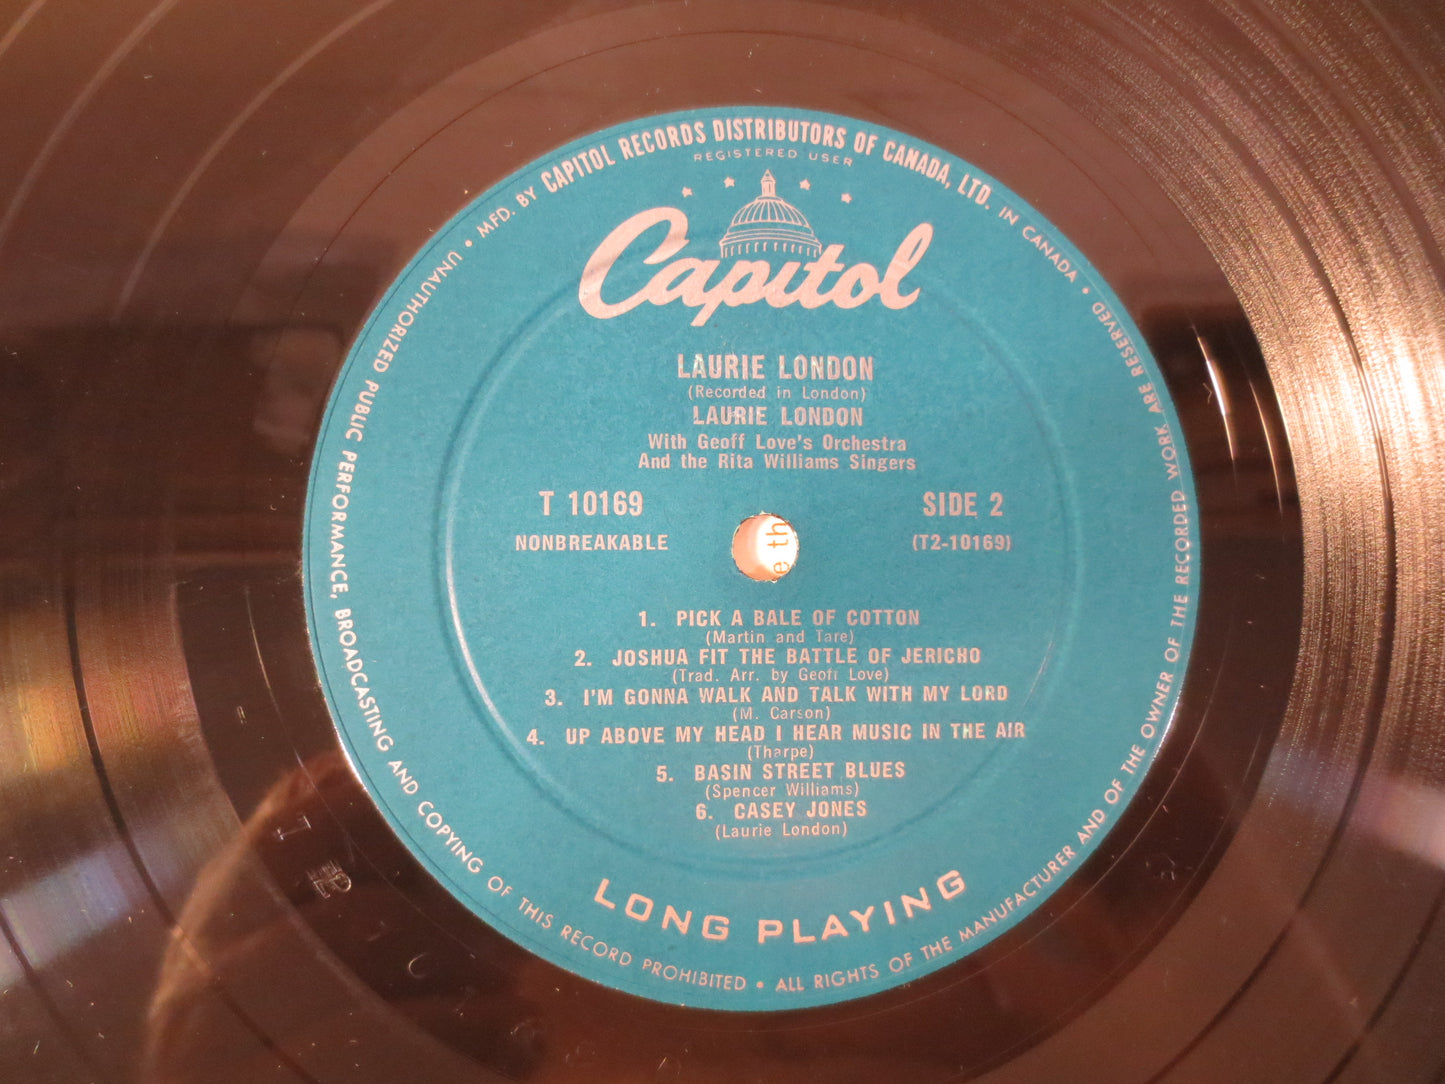 LAURIE LONDON Record, DEBUT Record, Laurie London Album, Laurie London Vinyl, Laurie London Lp, Vintage Pop, 1958 Records